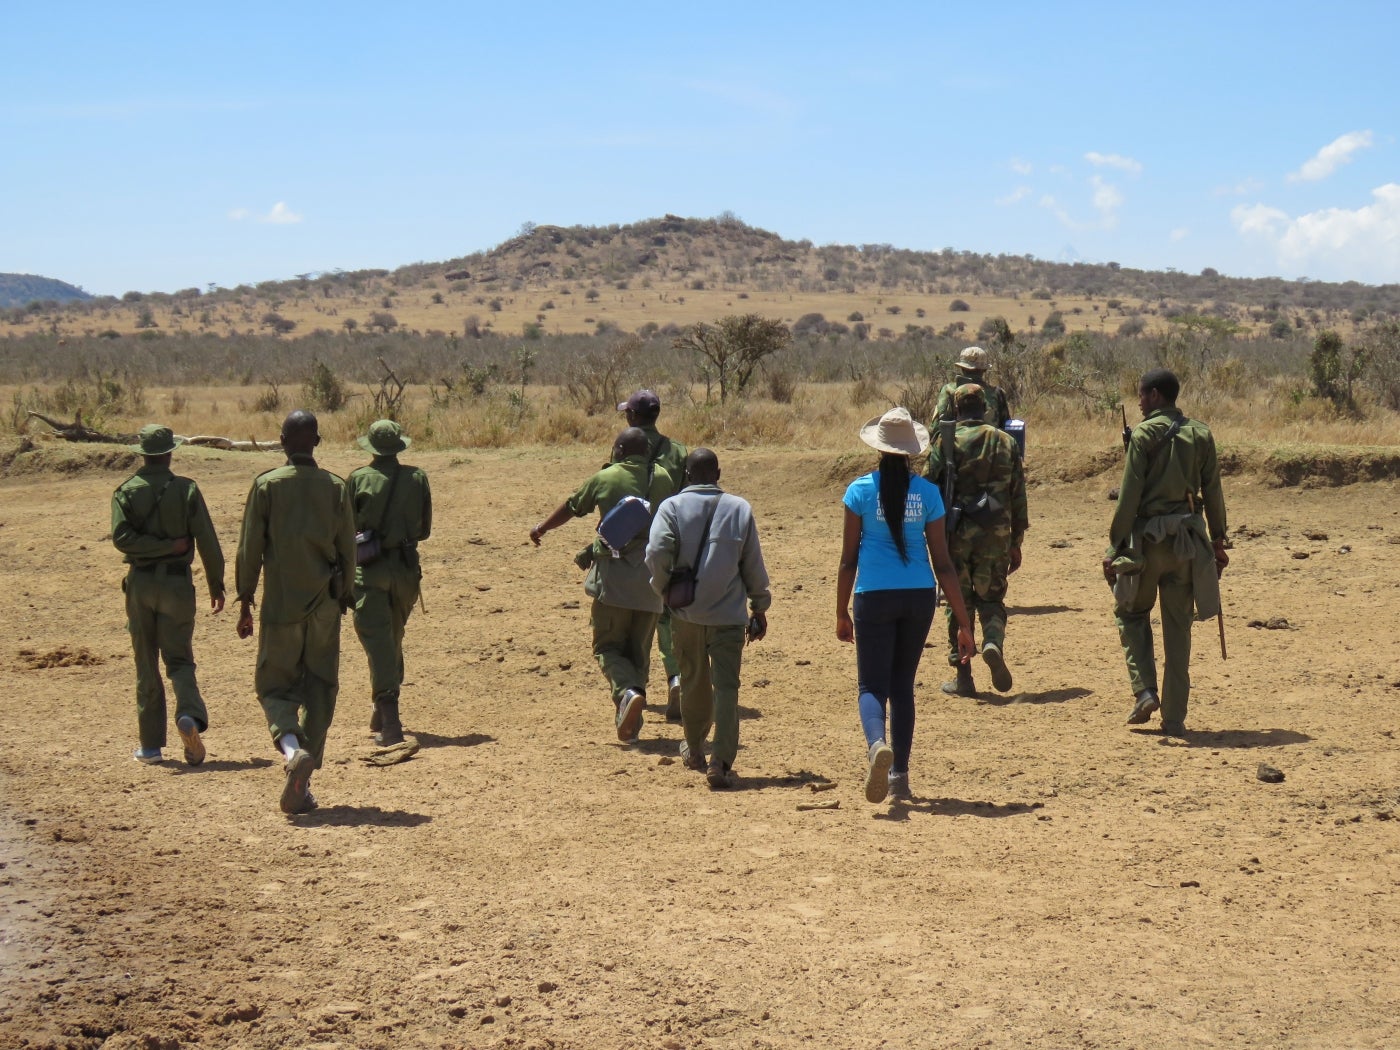 Veterinary research fellow Dr. Maureen Wanjiku Kamau and conservation manager Jamie Gaymer walk with a group of rangers at Ol Jogi Wildlife Conservancy in Kenya searching for rhino dung samples